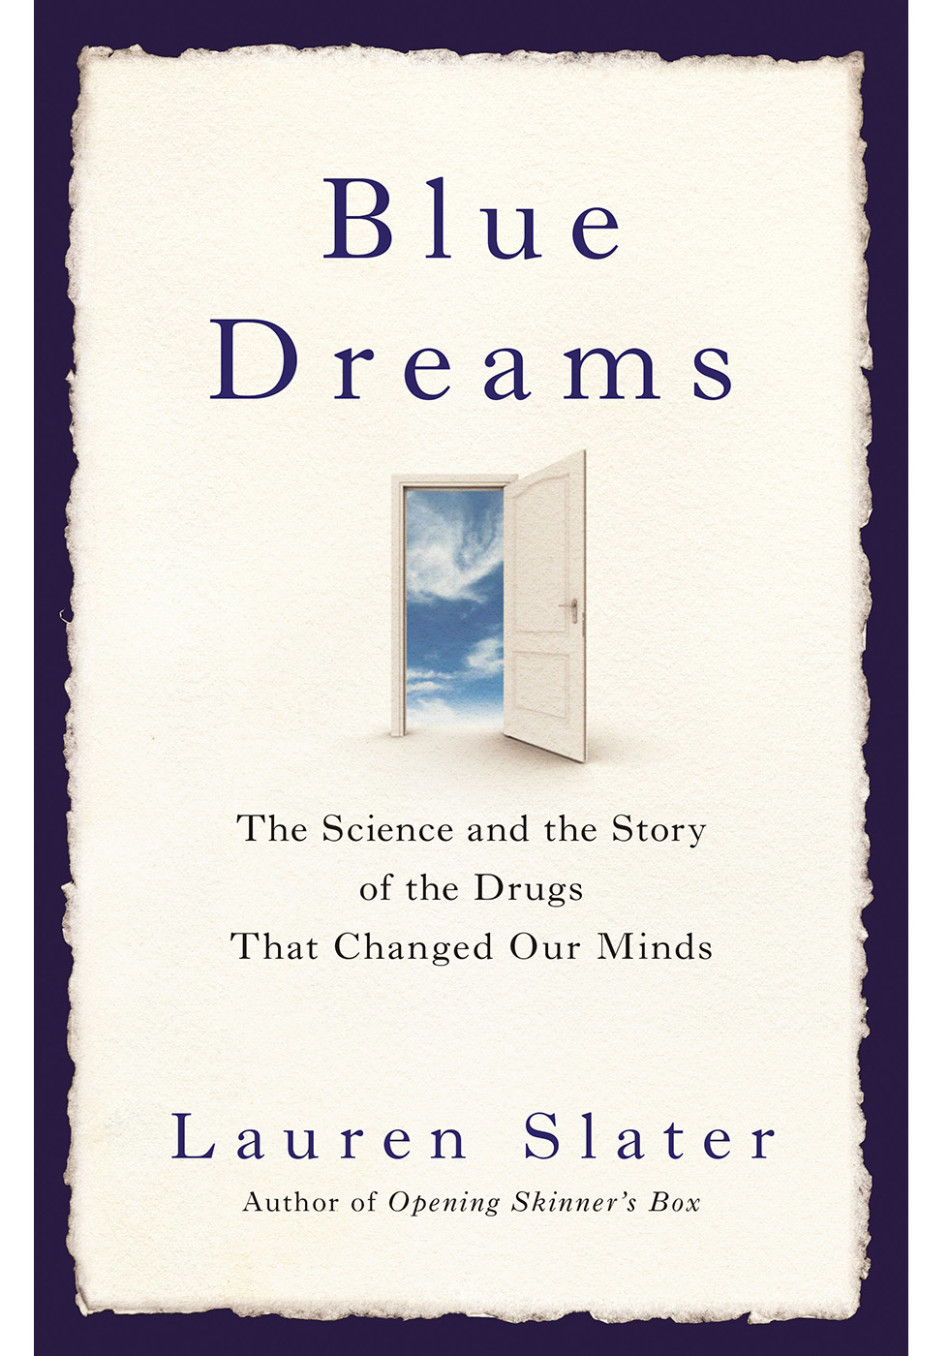 Blue Dreams The Science and the Story of the Drugs that Changed Our Minds